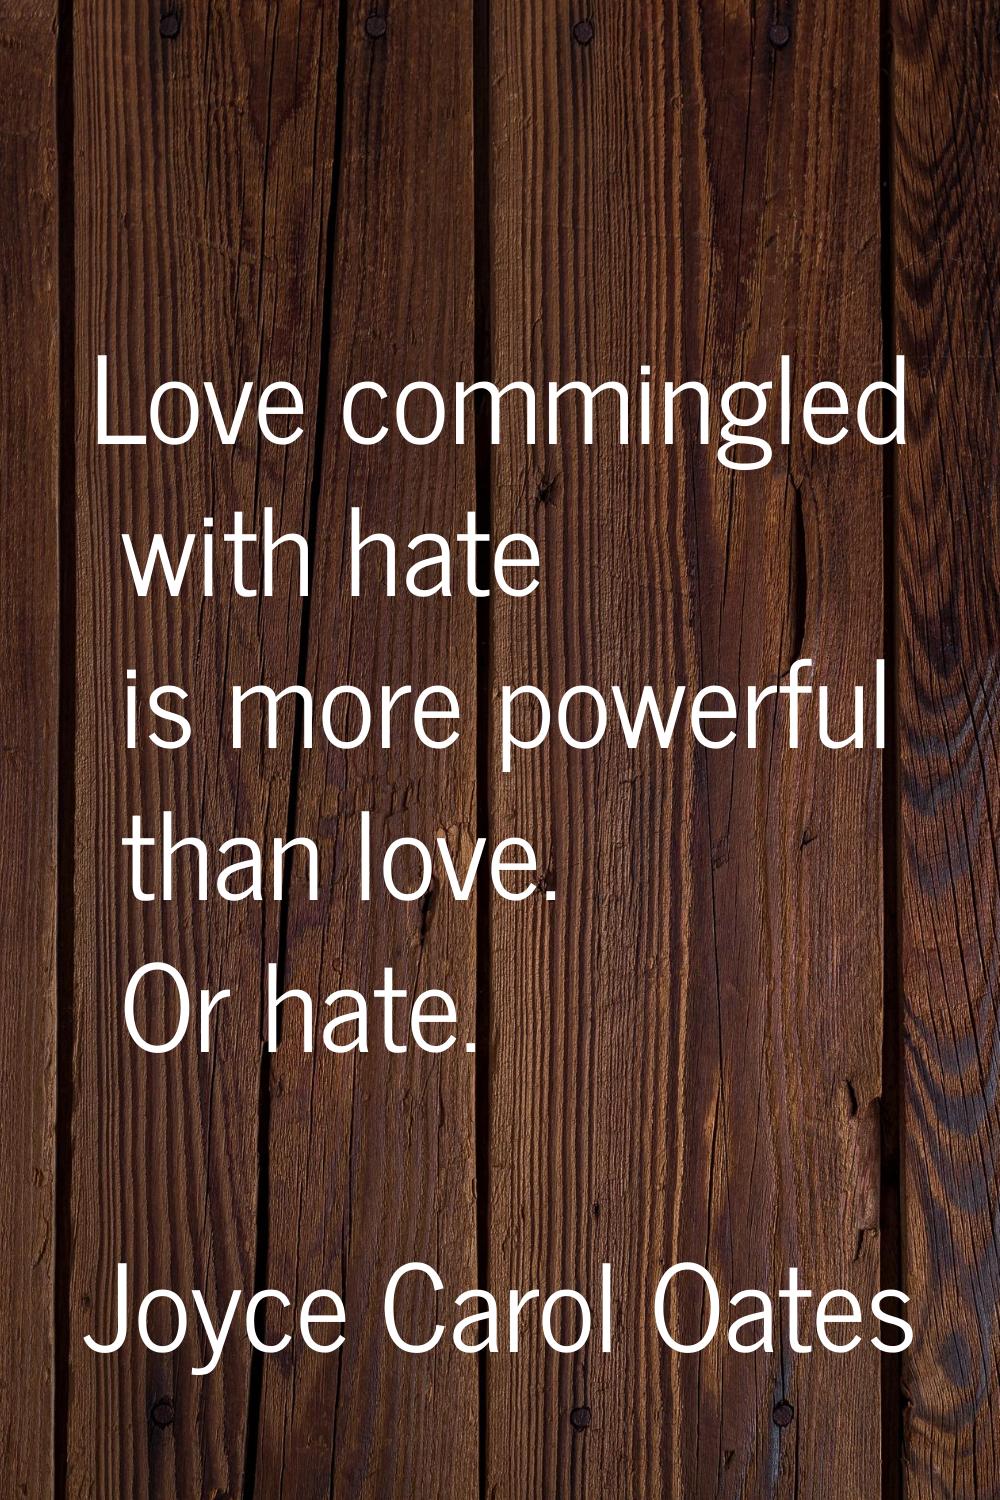 Love commingled with hate is more powerful than love. Or hate.